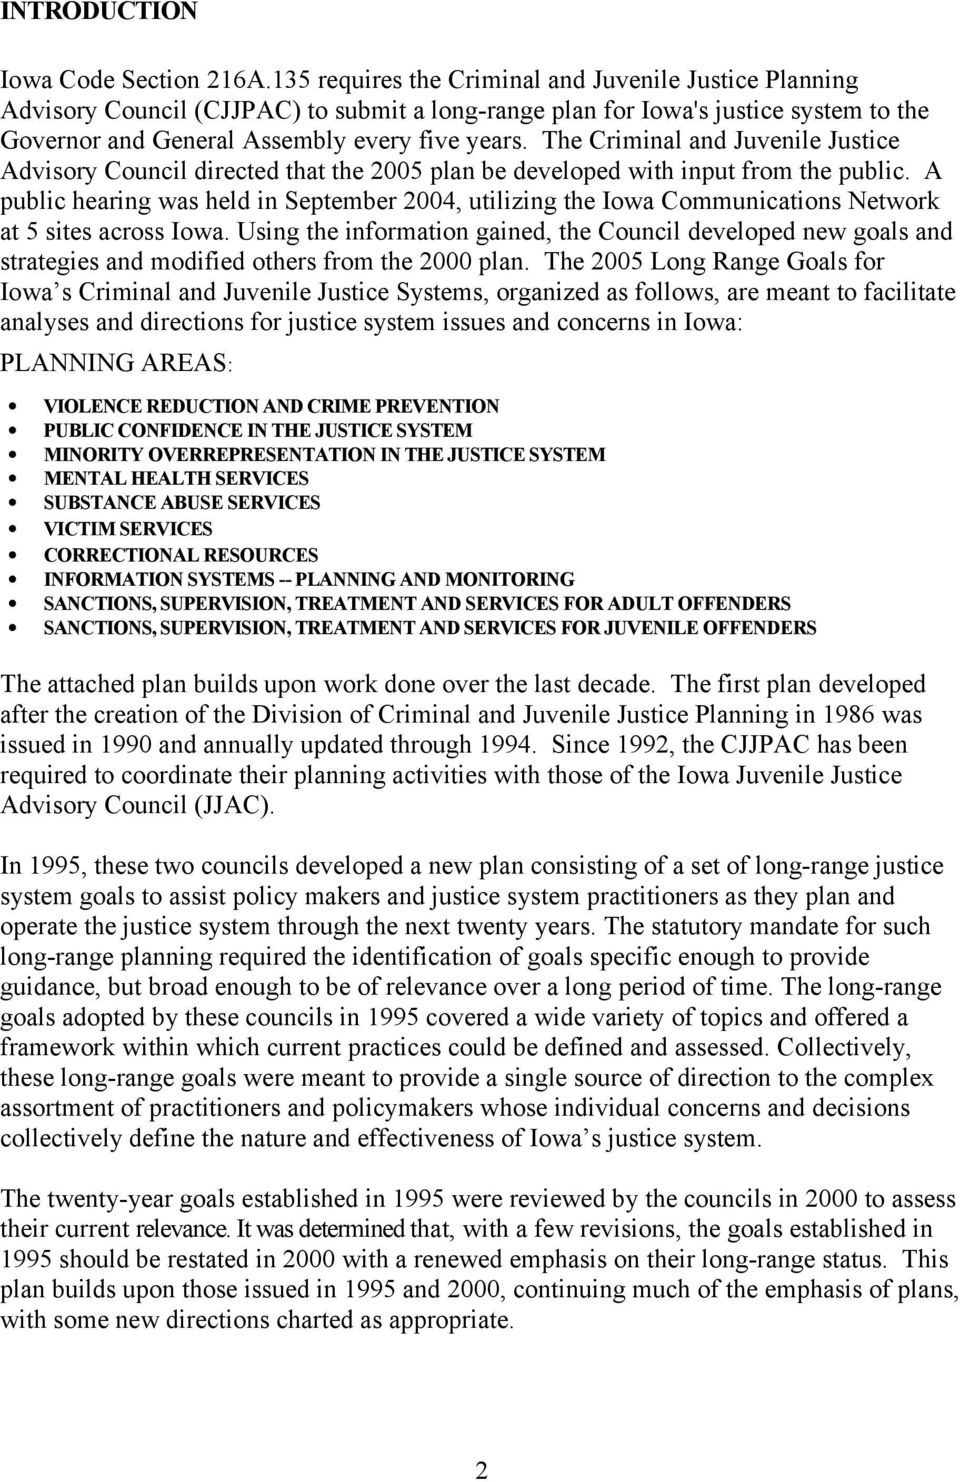 The Criminal and Juvenile Justice Advisory Council directed that the 2005 plan be developed with input from the public.